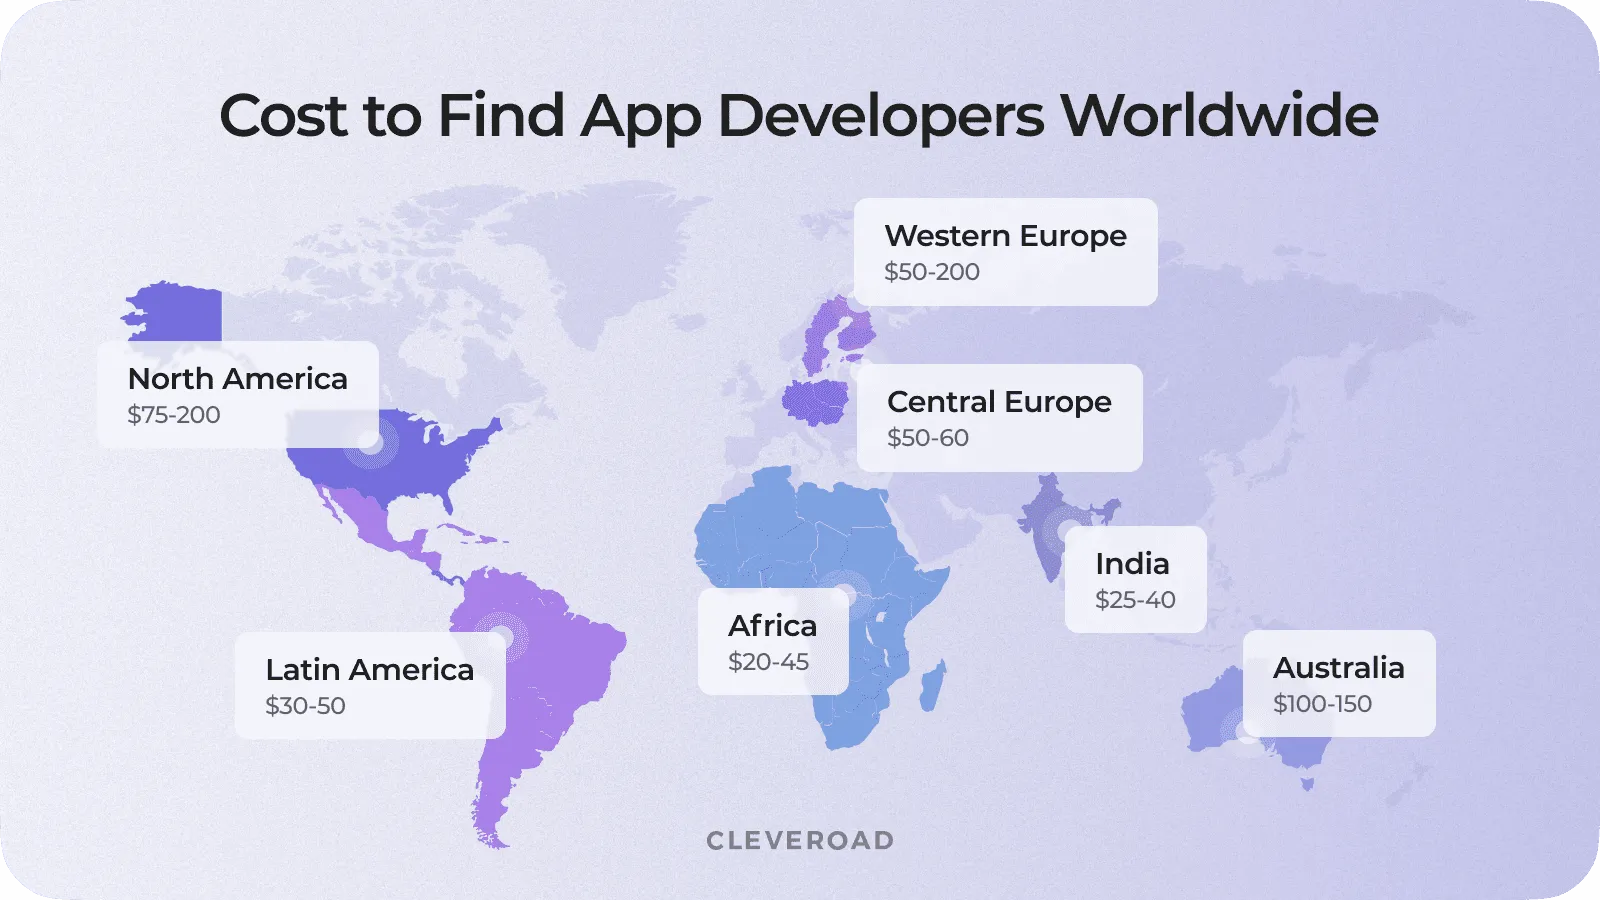 Cost to find app developers worldwide